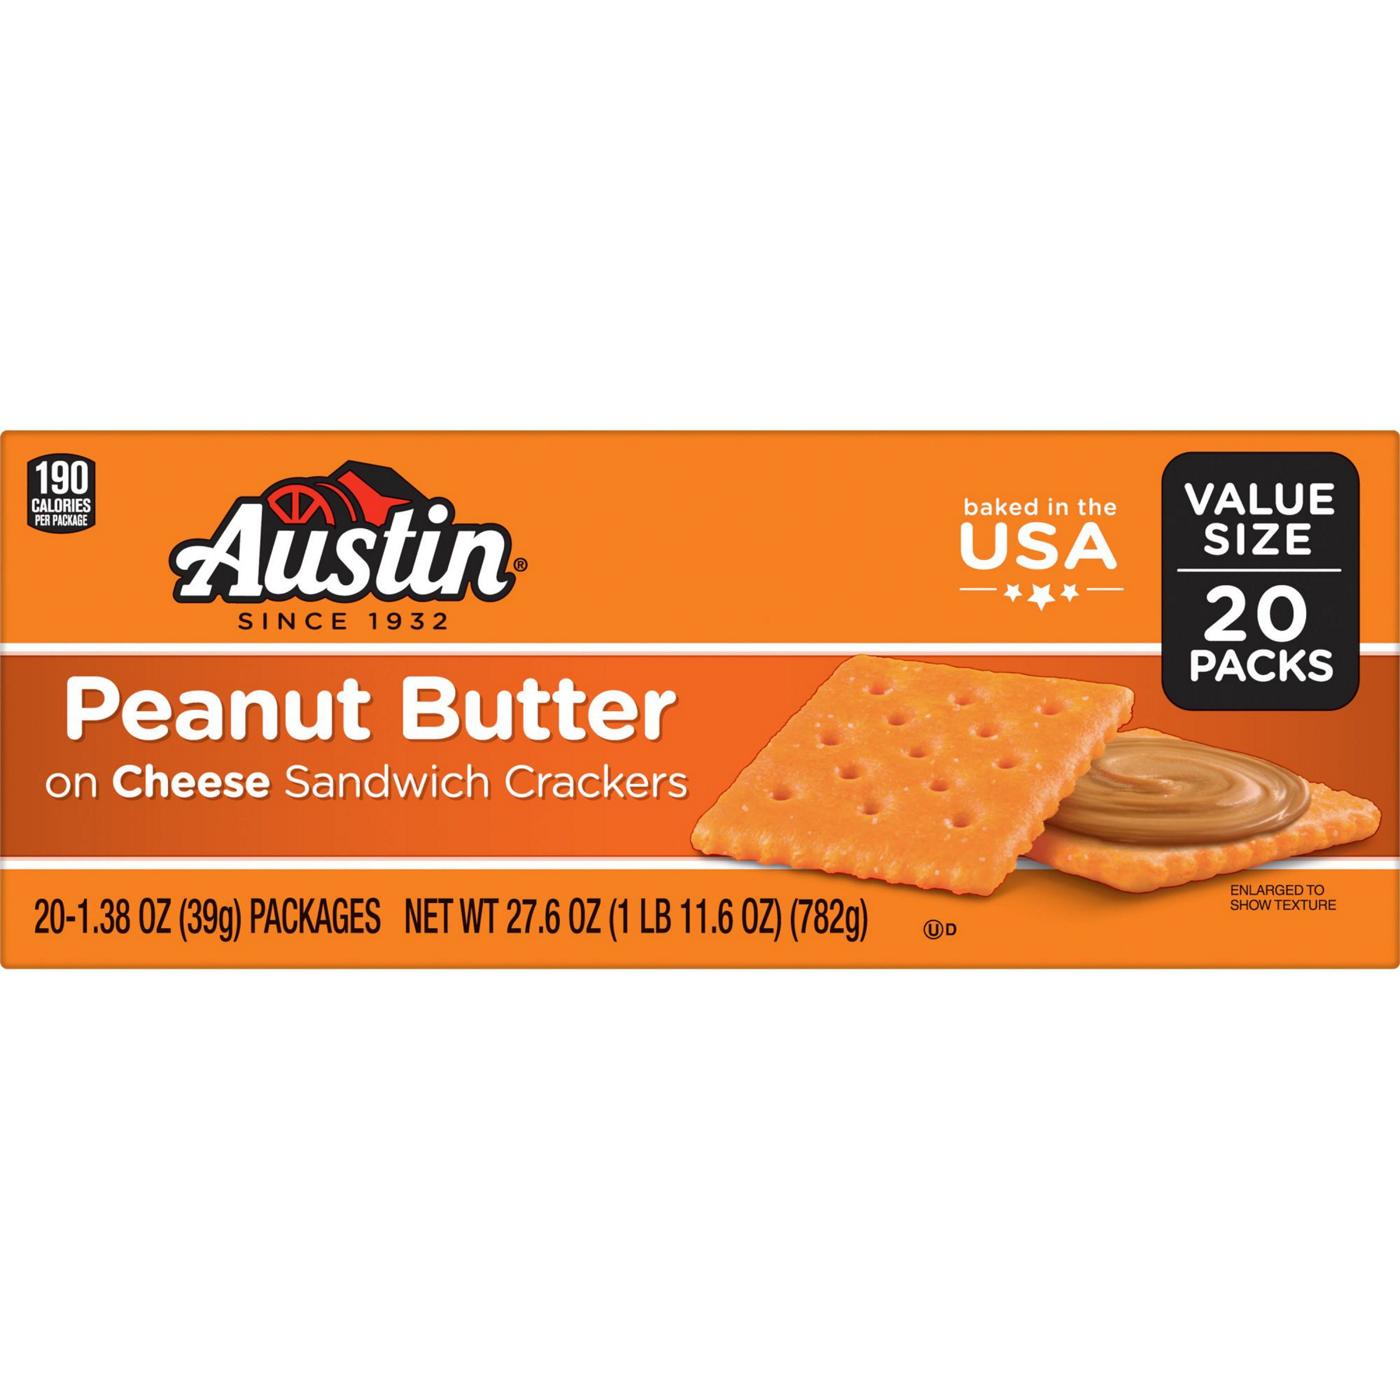 Austin Peanut Butter on Cheese Sandwich Crackers; image 1 of 2